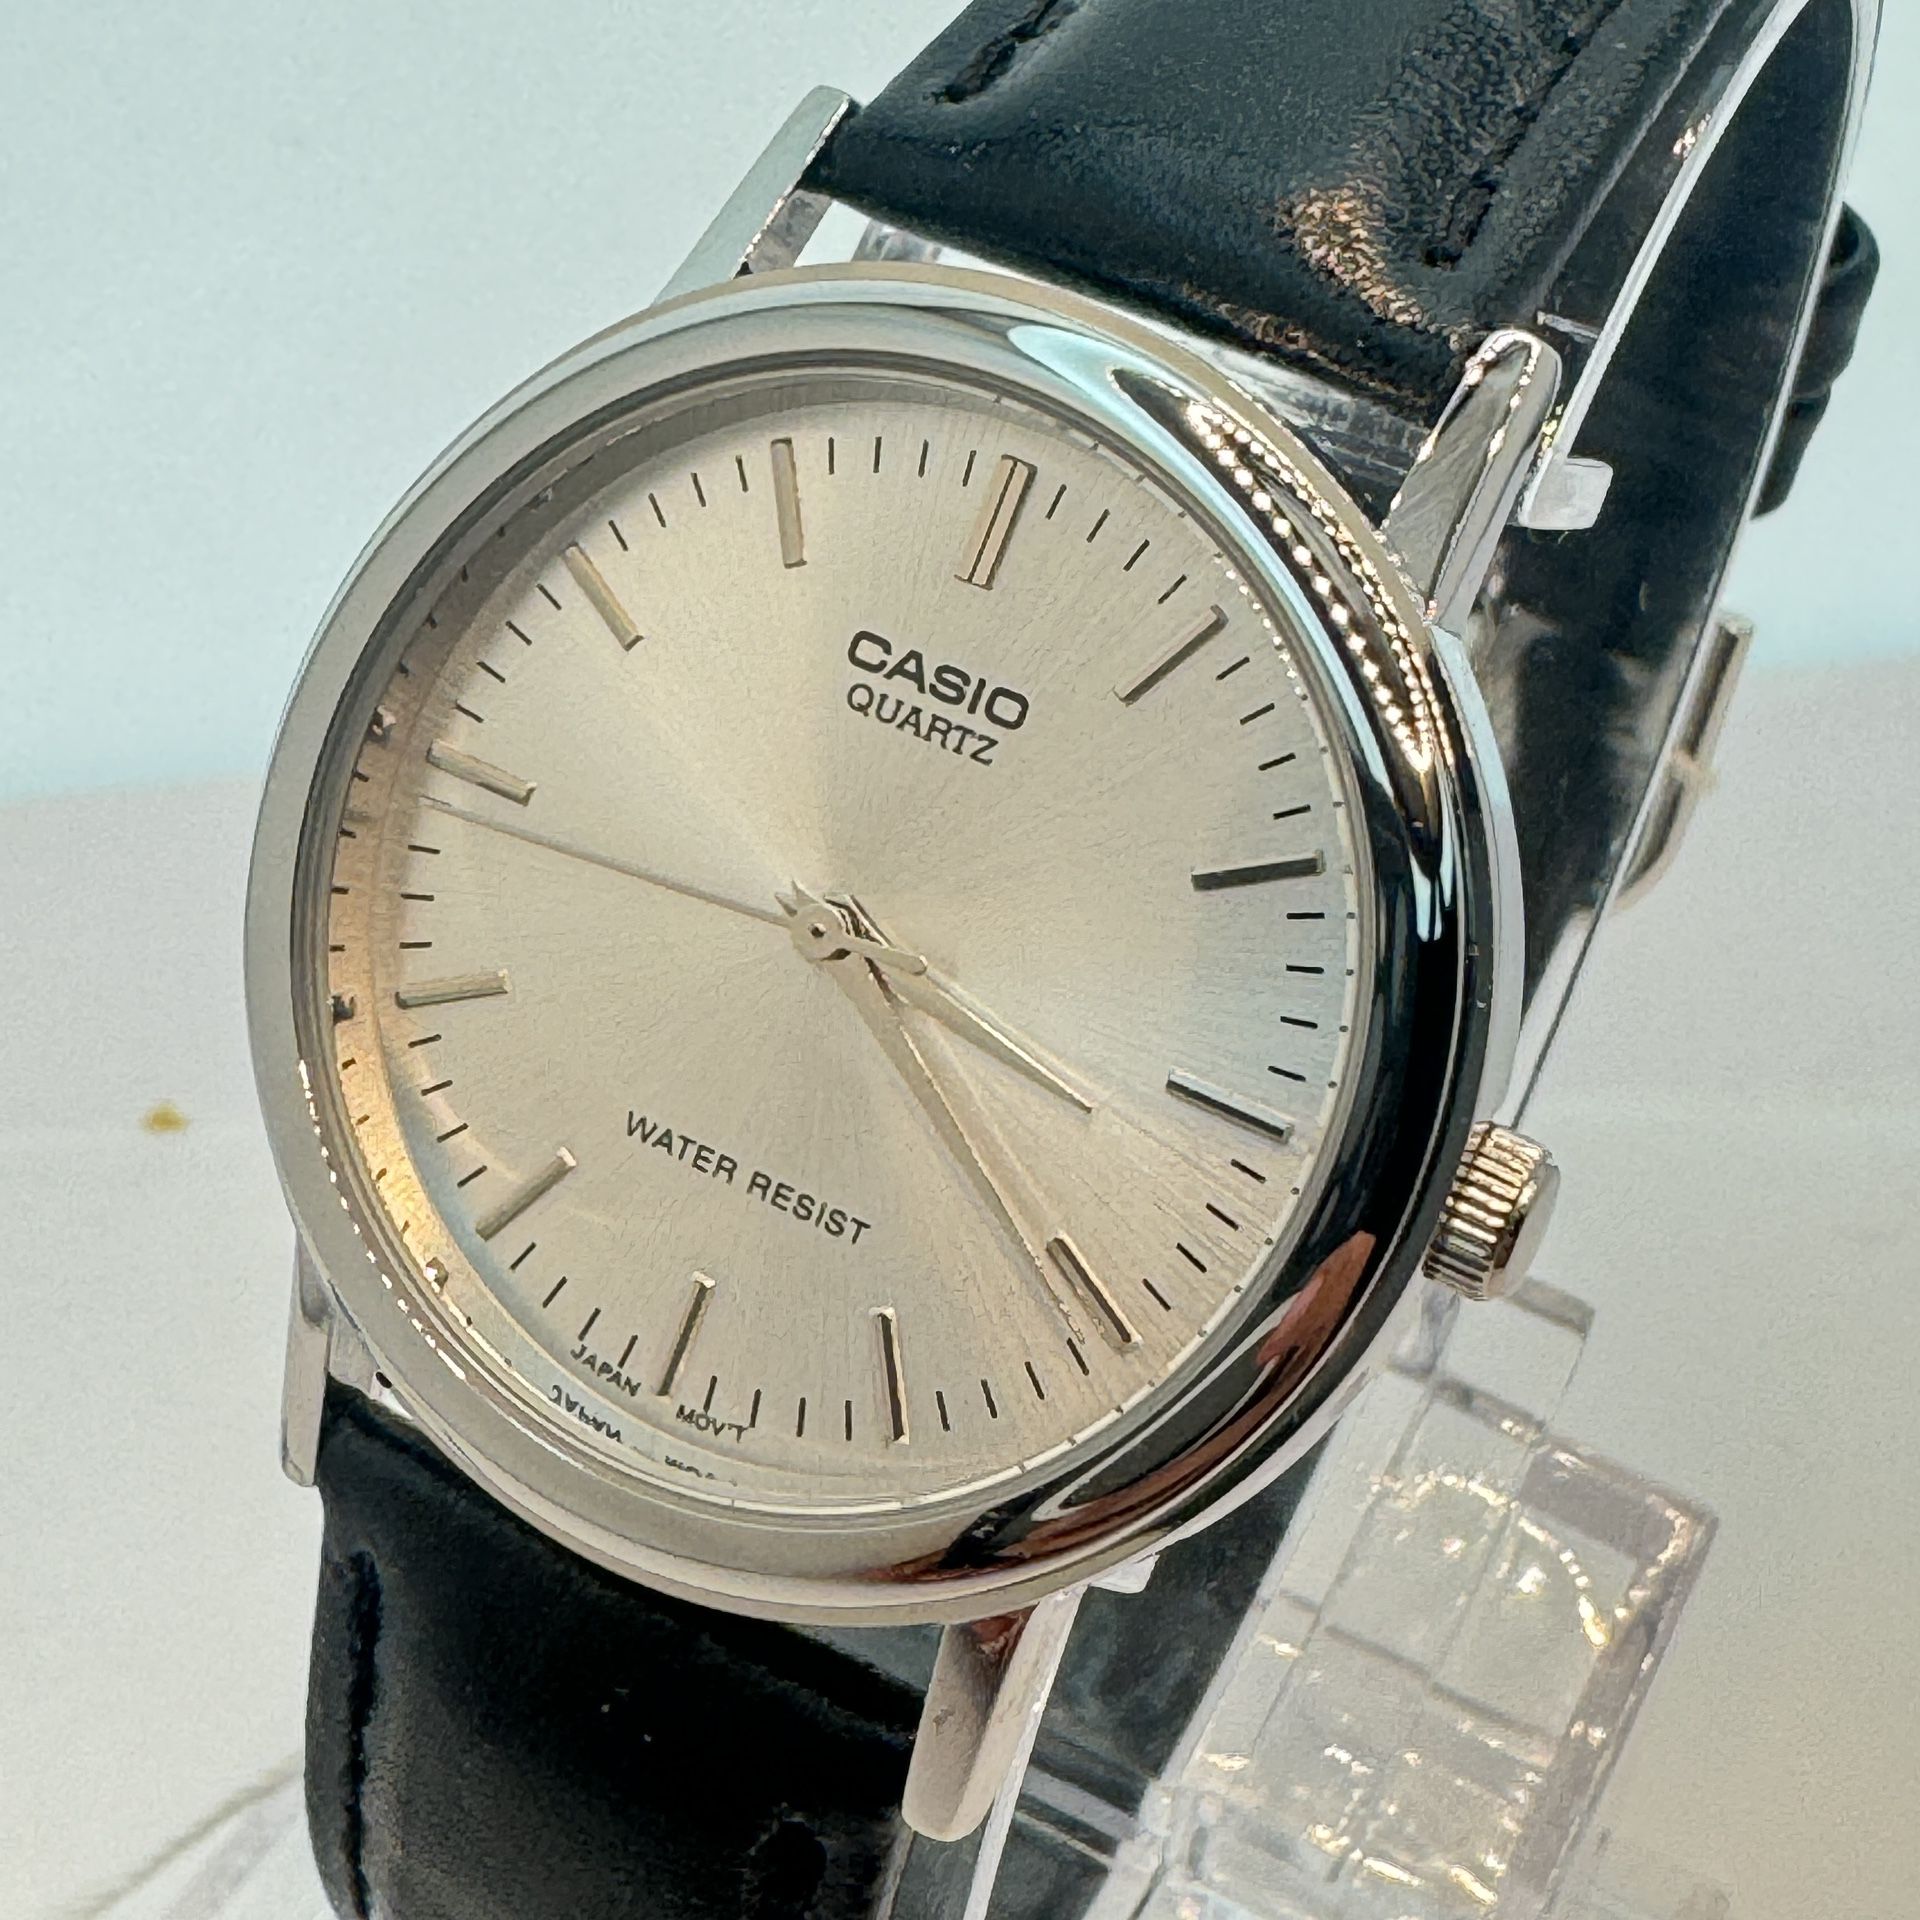 Casio Watch  for Men/Women Standard Size 37mm Diameter Brand New item  Stainless Steel Case  and Leather Band  New Battery Inside .Water Resistant, Ne